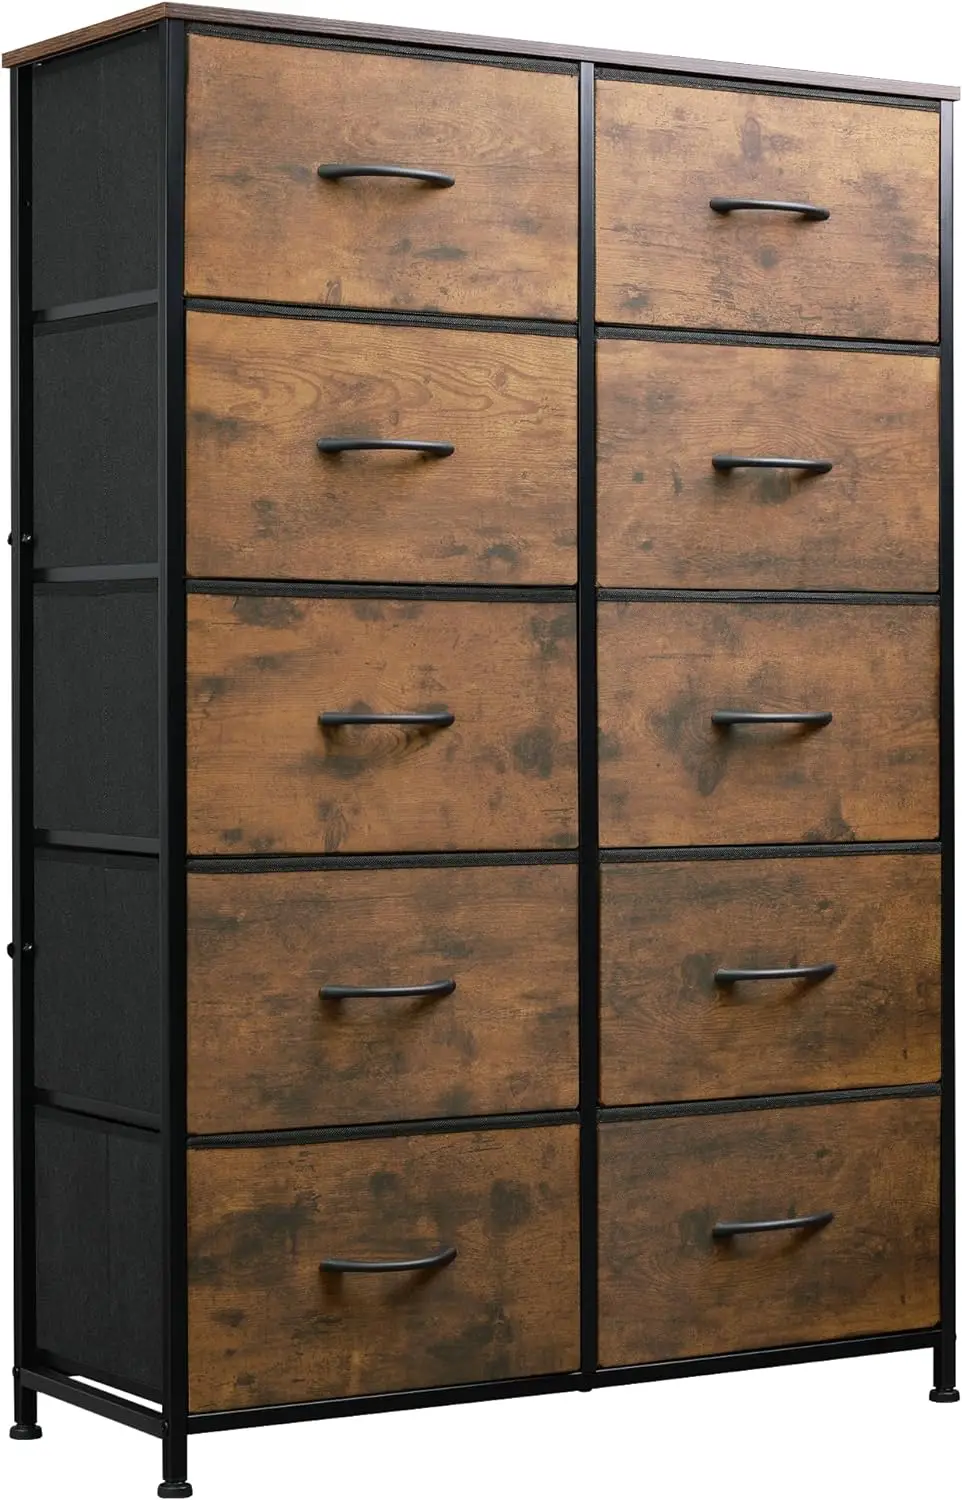 

WLIVE Tall Dresser for Bedroom with 10 Drawers, Chest of Drawers, Dressers Bedroom Furniture, Storage Organizer Unit